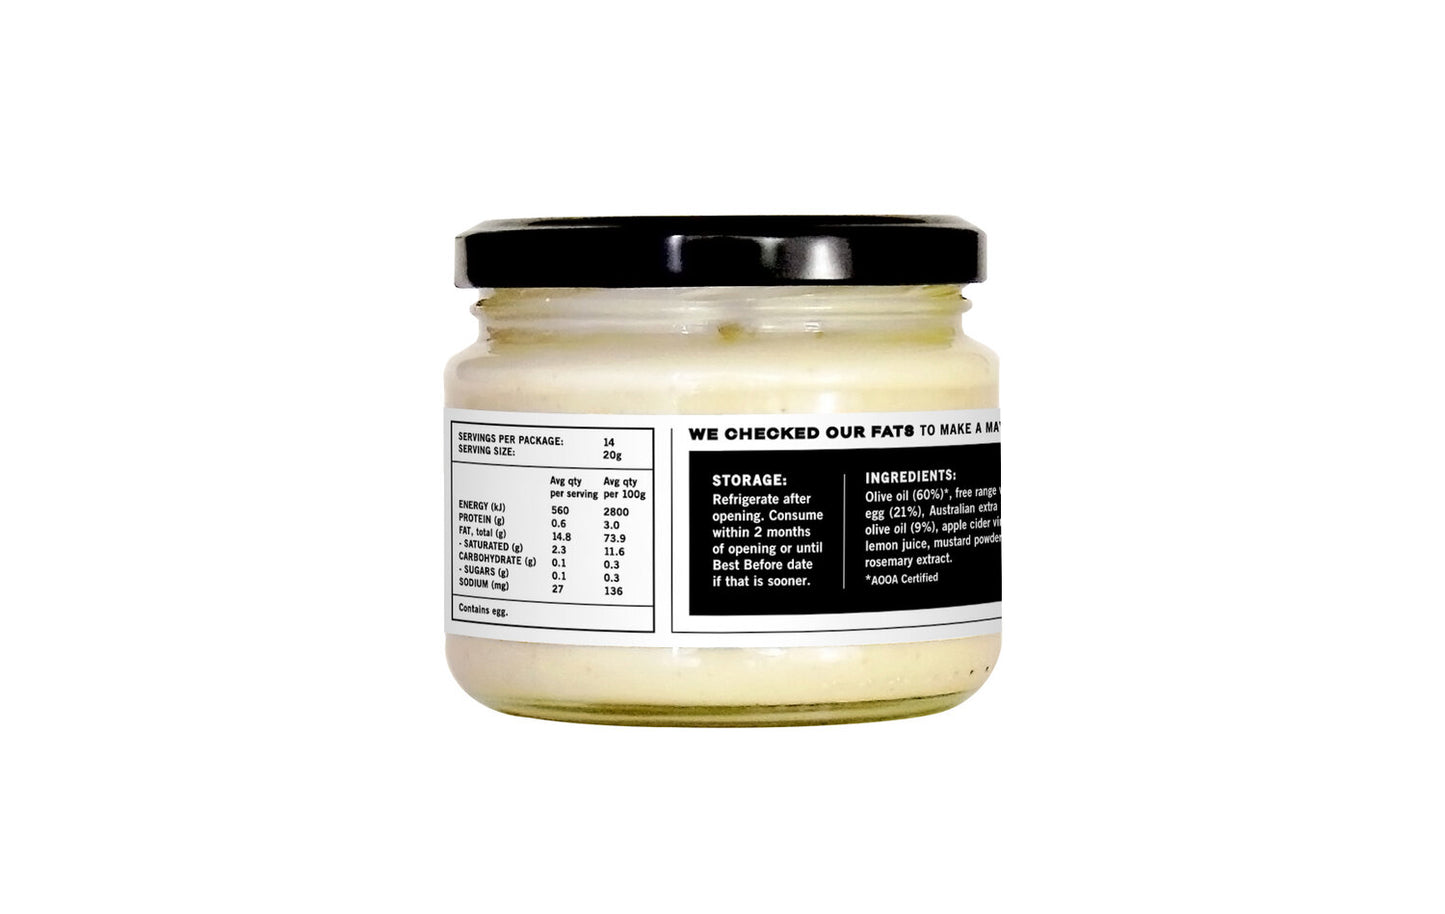 Undivided Food Co GOOD Fat™ Mayo 280g, With Organic Olive Oil & Gluten Free